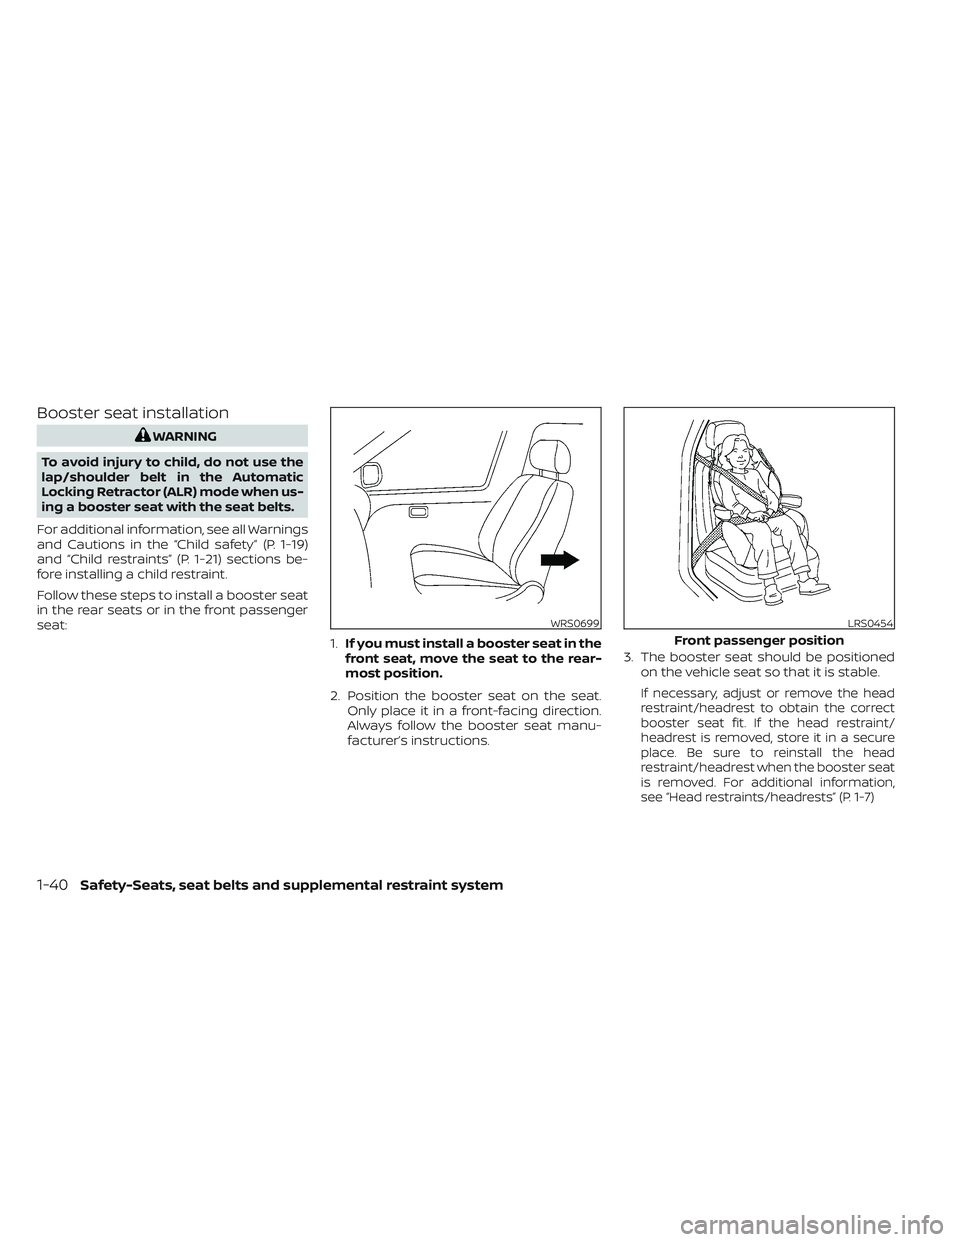 NISSAN MAXIMA 2023 Workshop Manual Booster seat installation
WARNING
To avoid injury to child, do not use the
lap/shoulder belt in the Automatic
Locking Retractor (ALR) mode when us-
ing a booster seat with the seat belts.
For addition